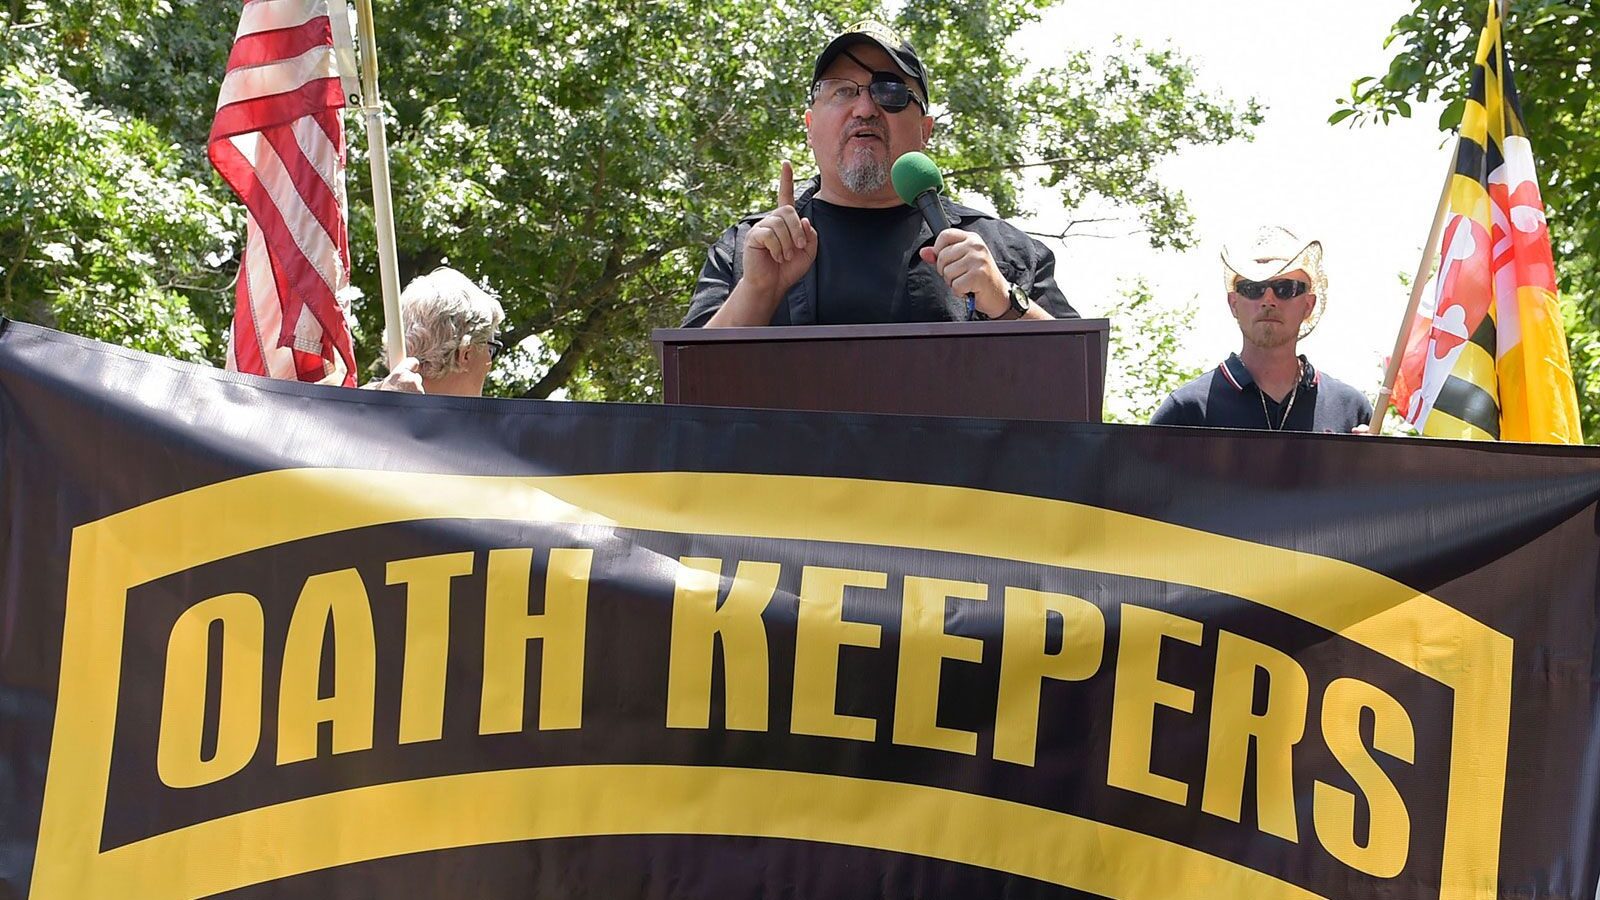 Stewart Rhodes, founder of the Oath Keepers, center, speaks during a rally outside the White House ...